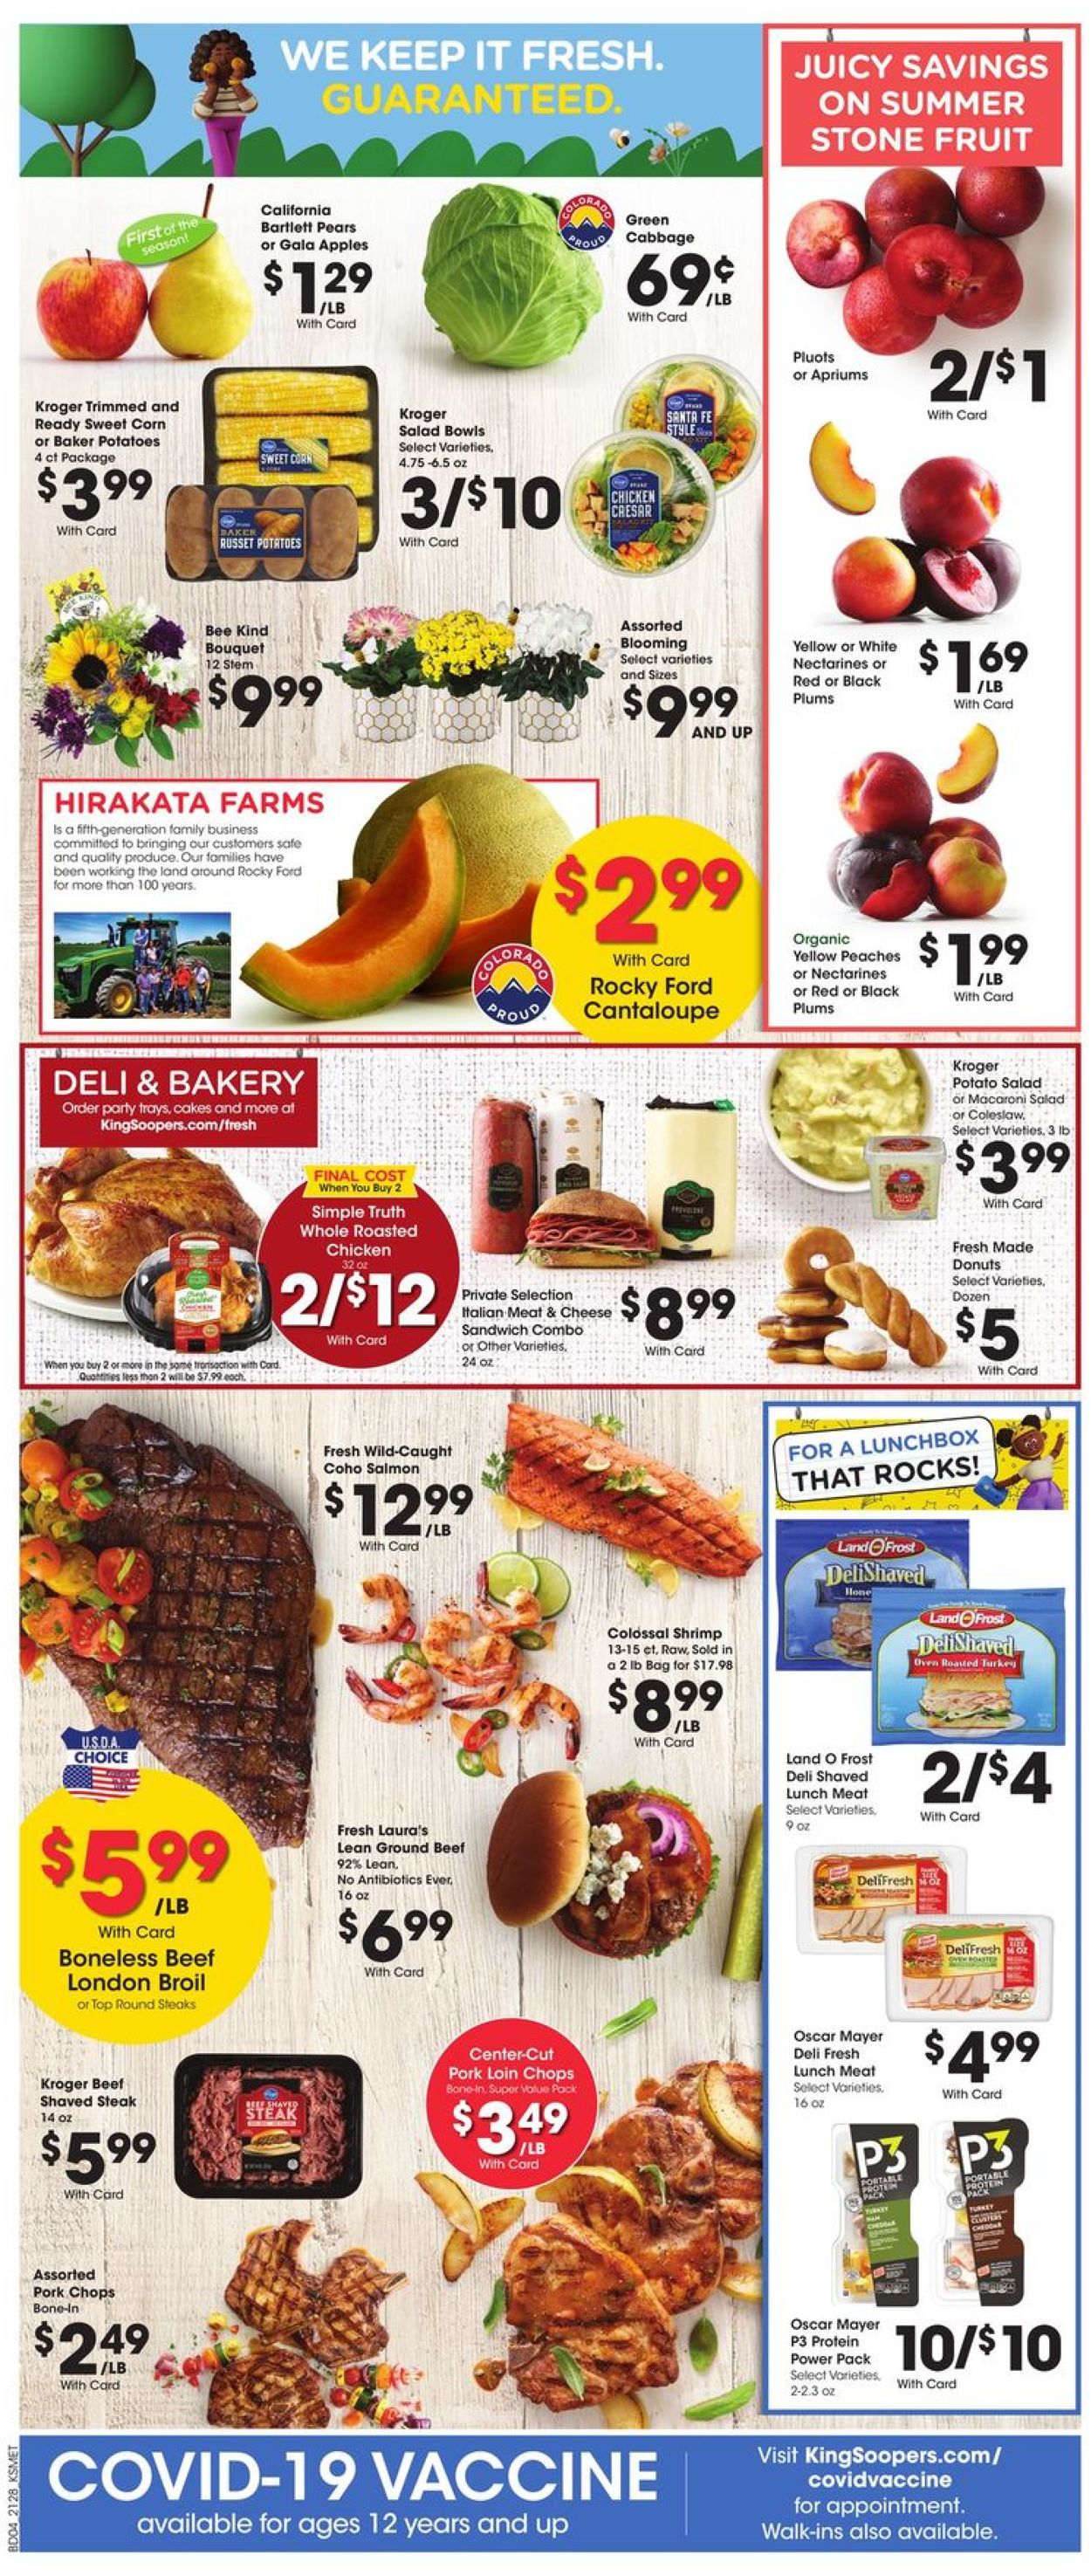 King Soopers Current weekly ad 08/11 - 08/17/2021 [10] - frequent-ads.com